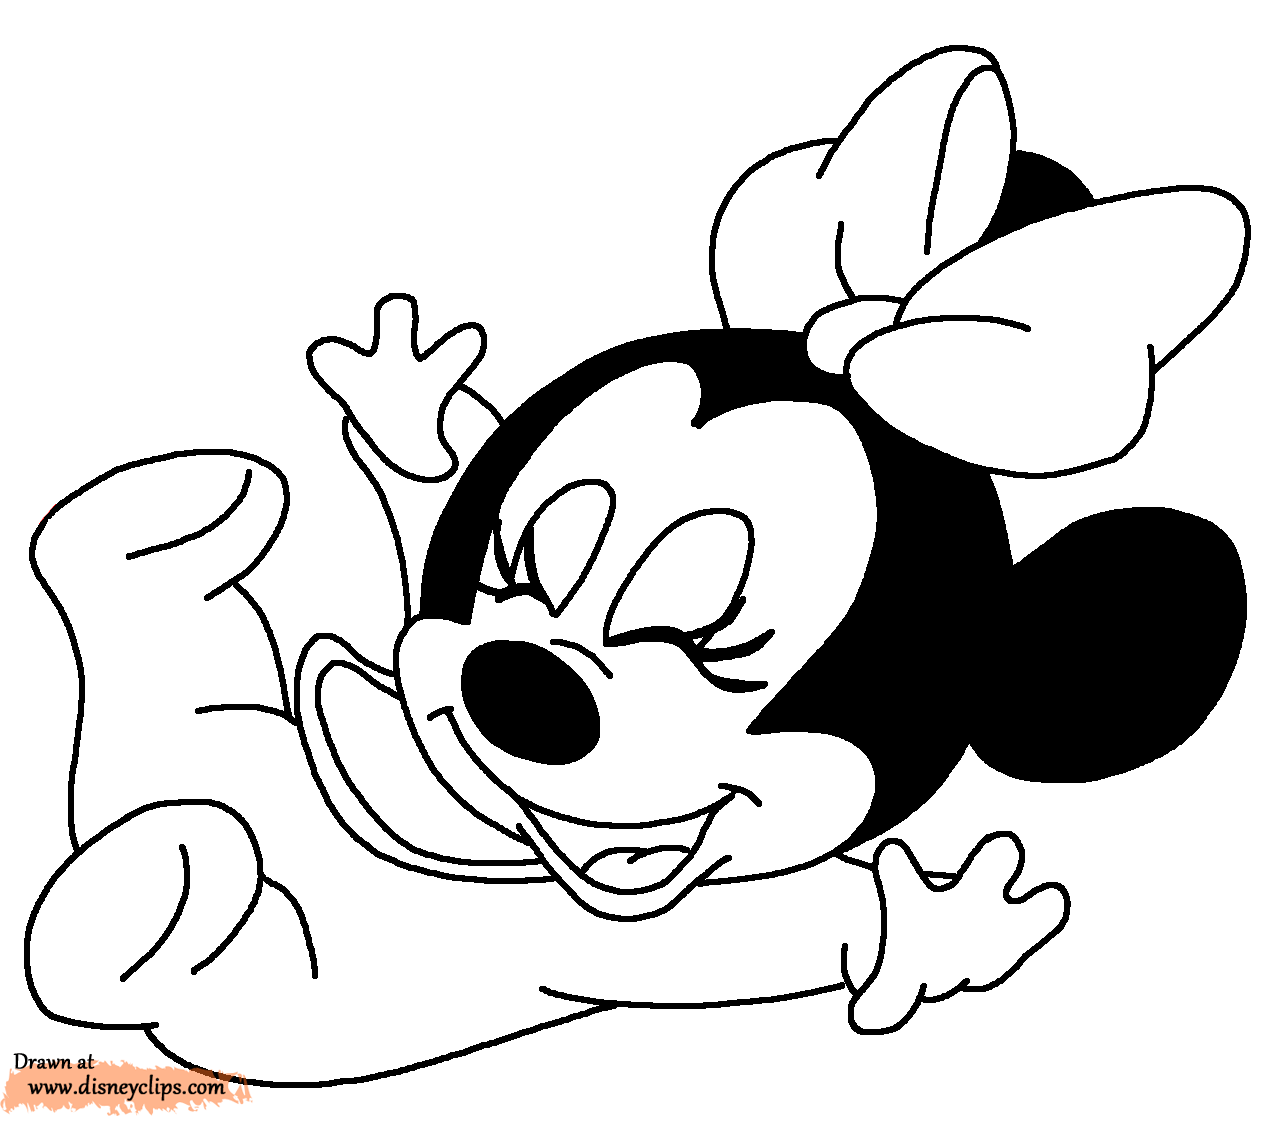 Free Disney Baby Character Coloring Pages - Coloring Home